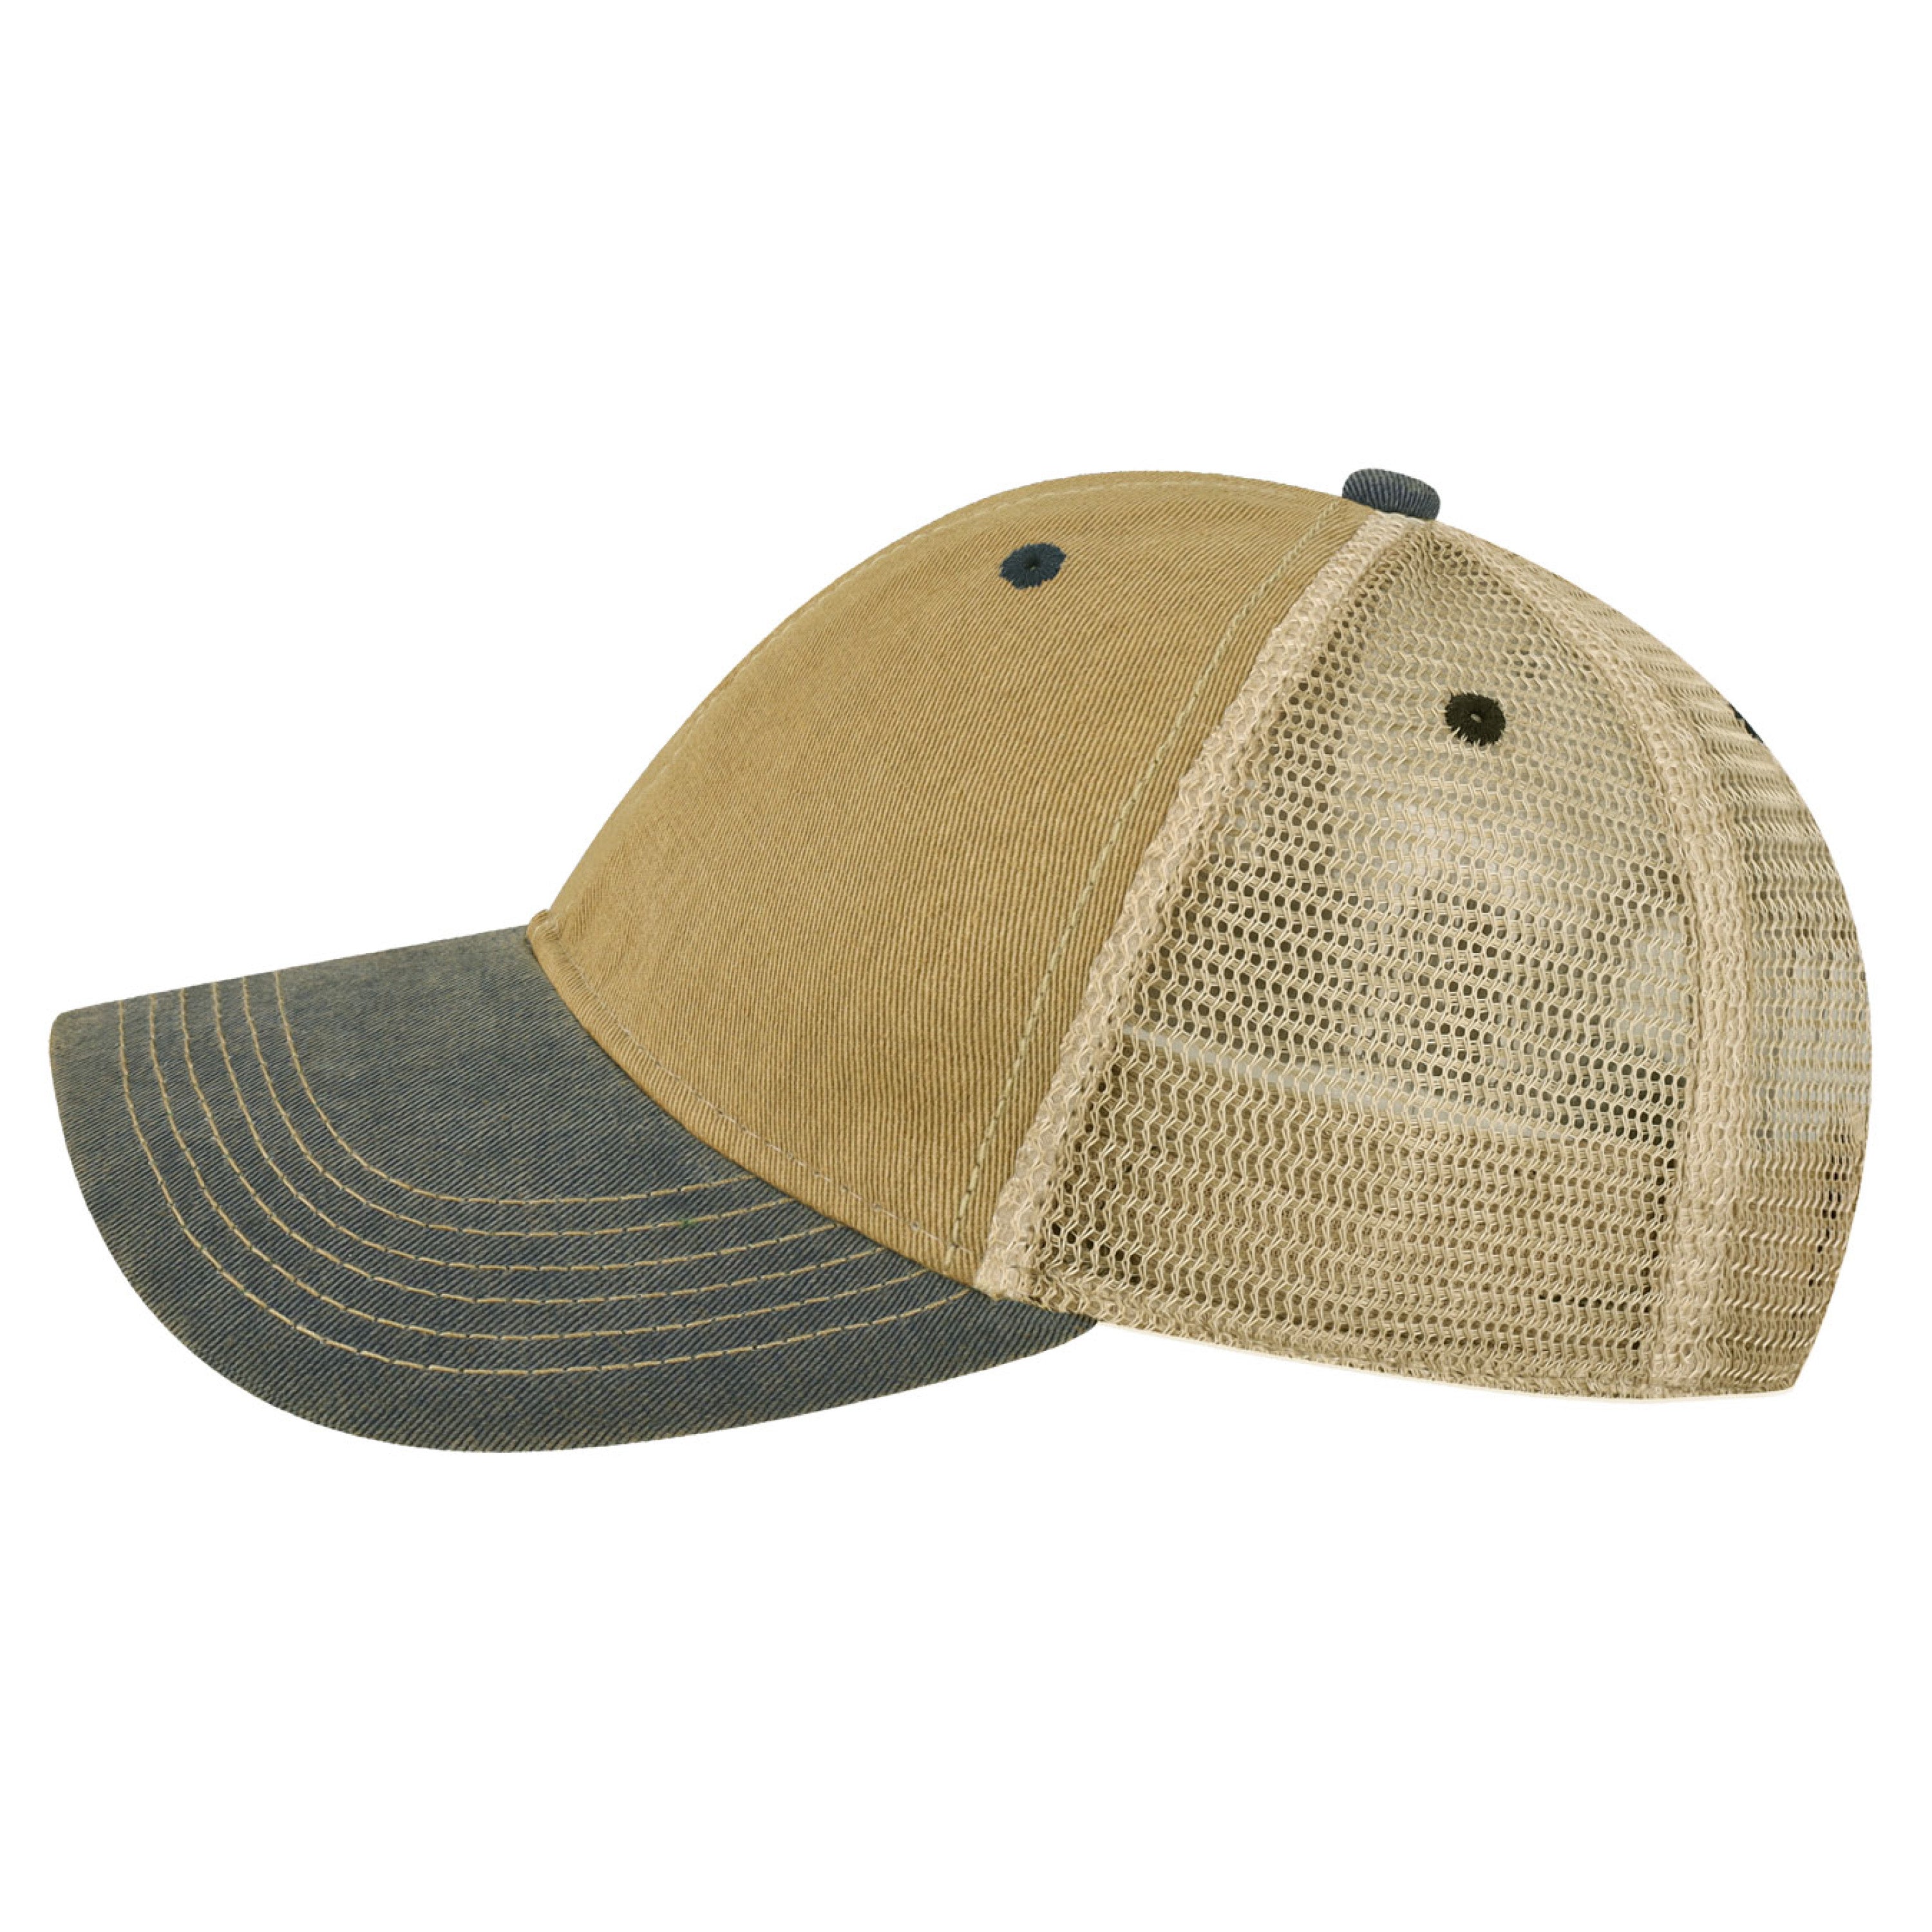 Category 10 Spirits + Sports Washed Trucker Hat